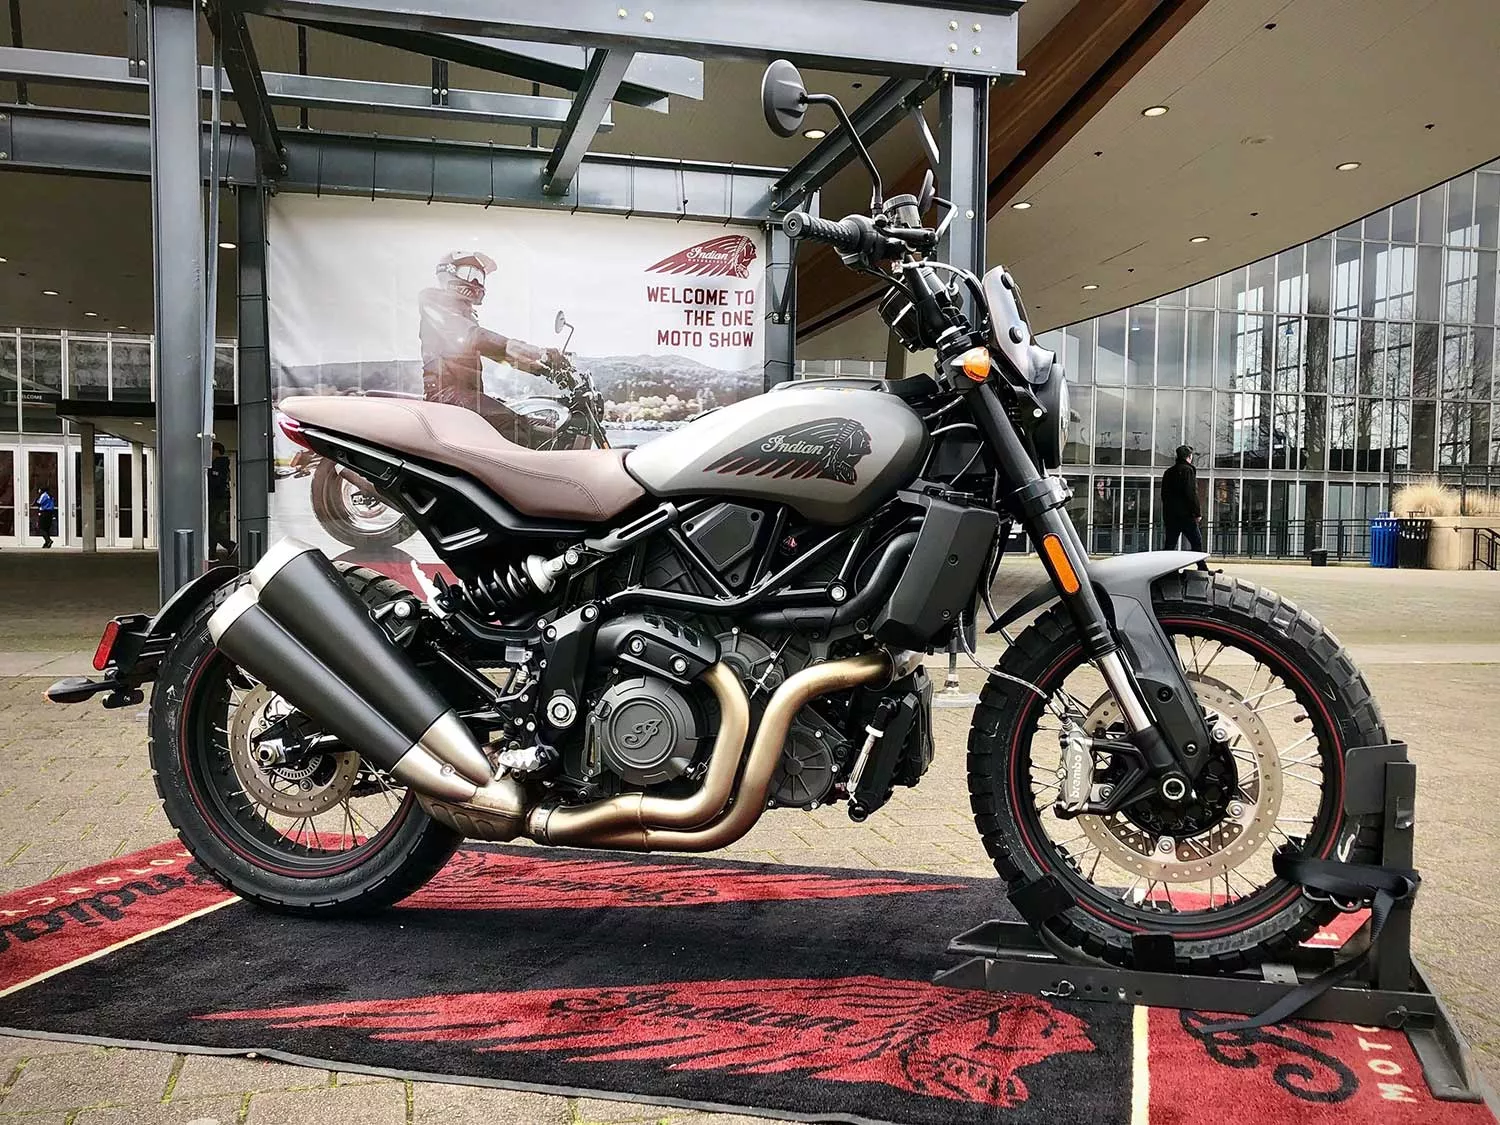 The 2020 FTR Rally was first shown to the North American public at The One Moto Show in Portland, Oregon, earlier this month. Turns out they had a bike left over to lend us.